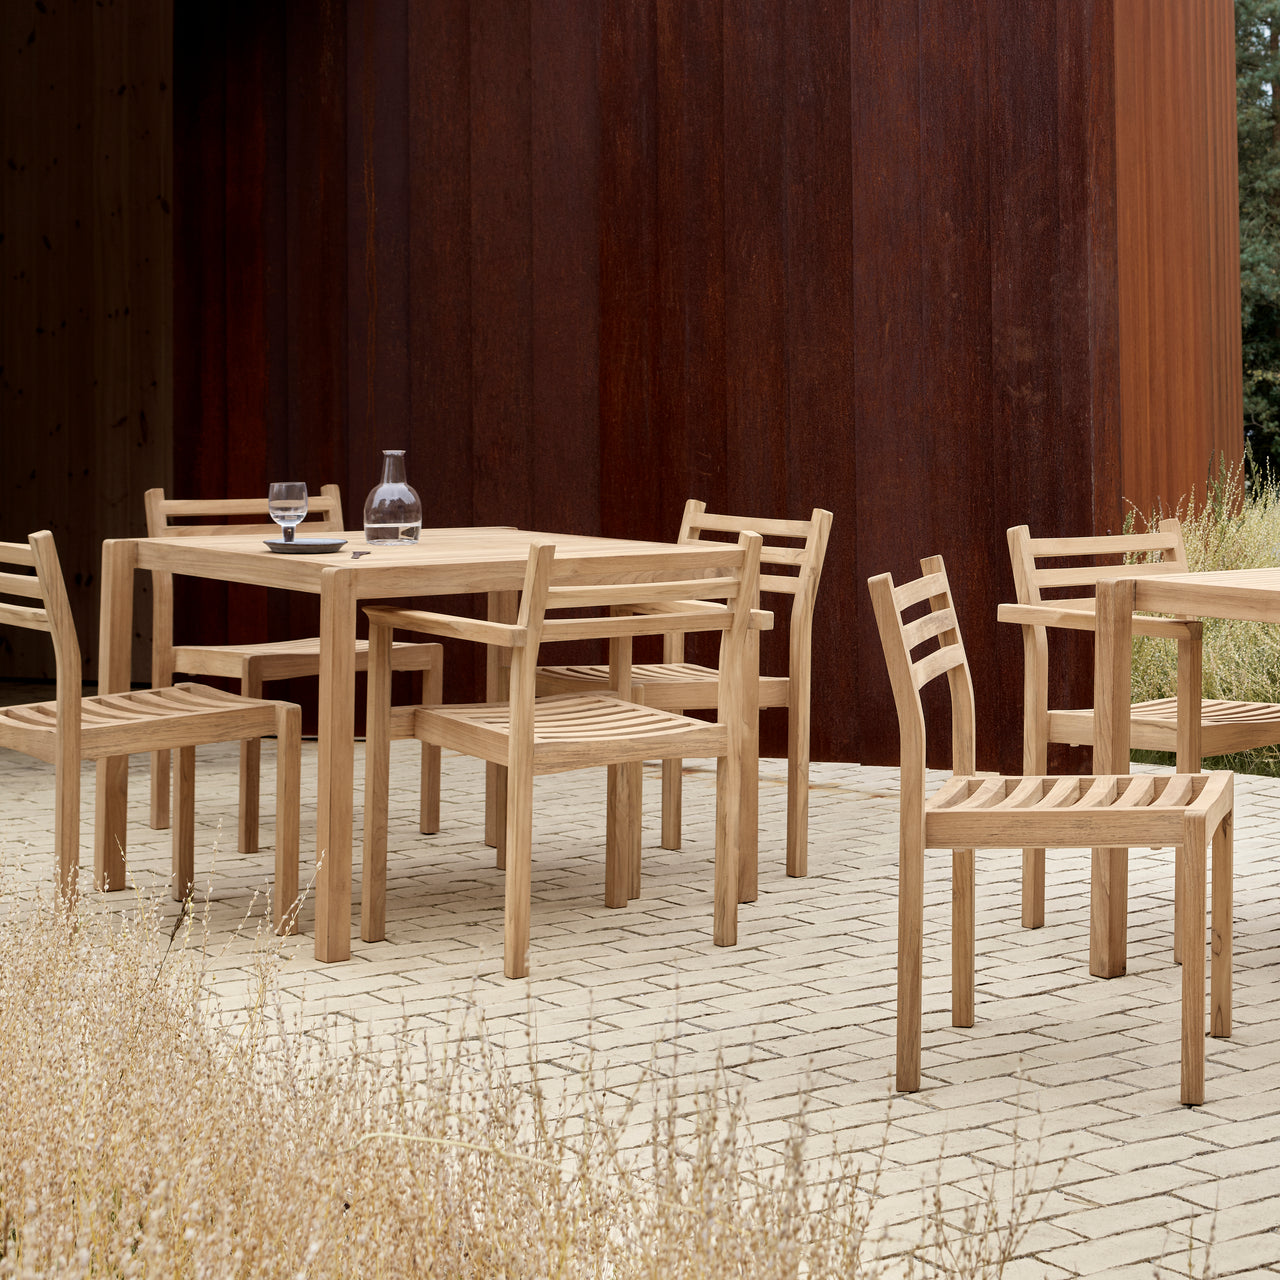 AH502 Outdoor Dining Chair with Armrest: Stacking